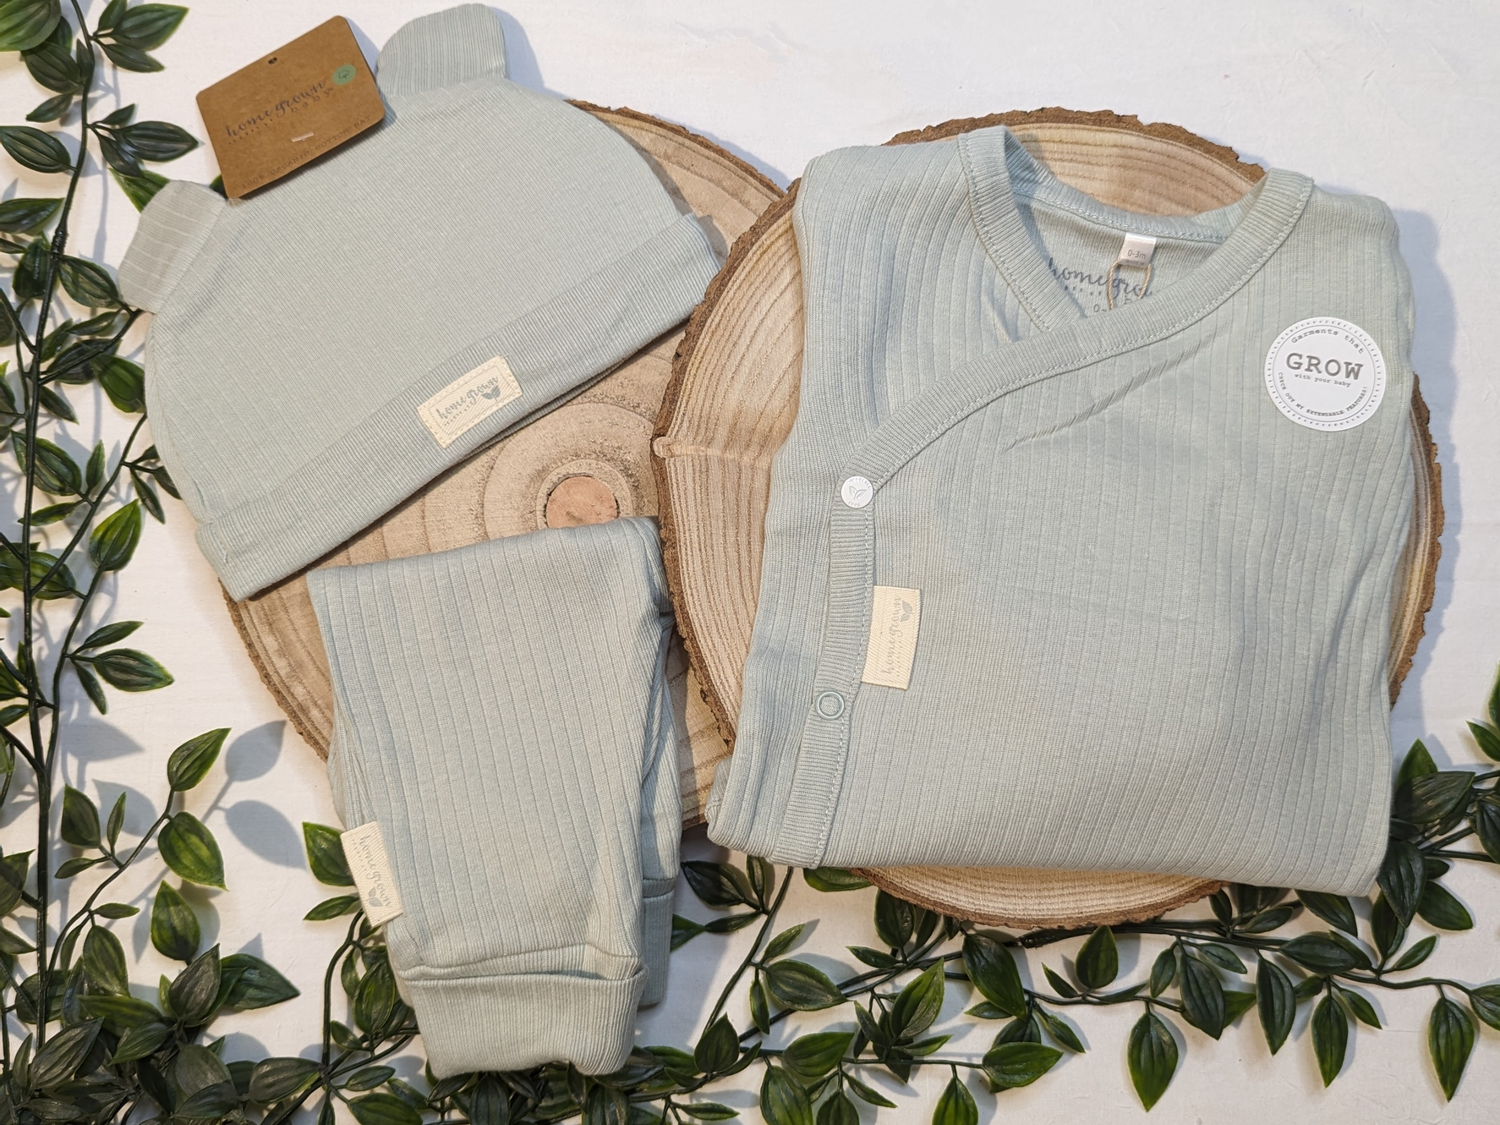 Unisex baby clothes, sage green organic baby three piece set. Includes ribbed sage green organic trousers, bodysuit and hat featuring bear ears.